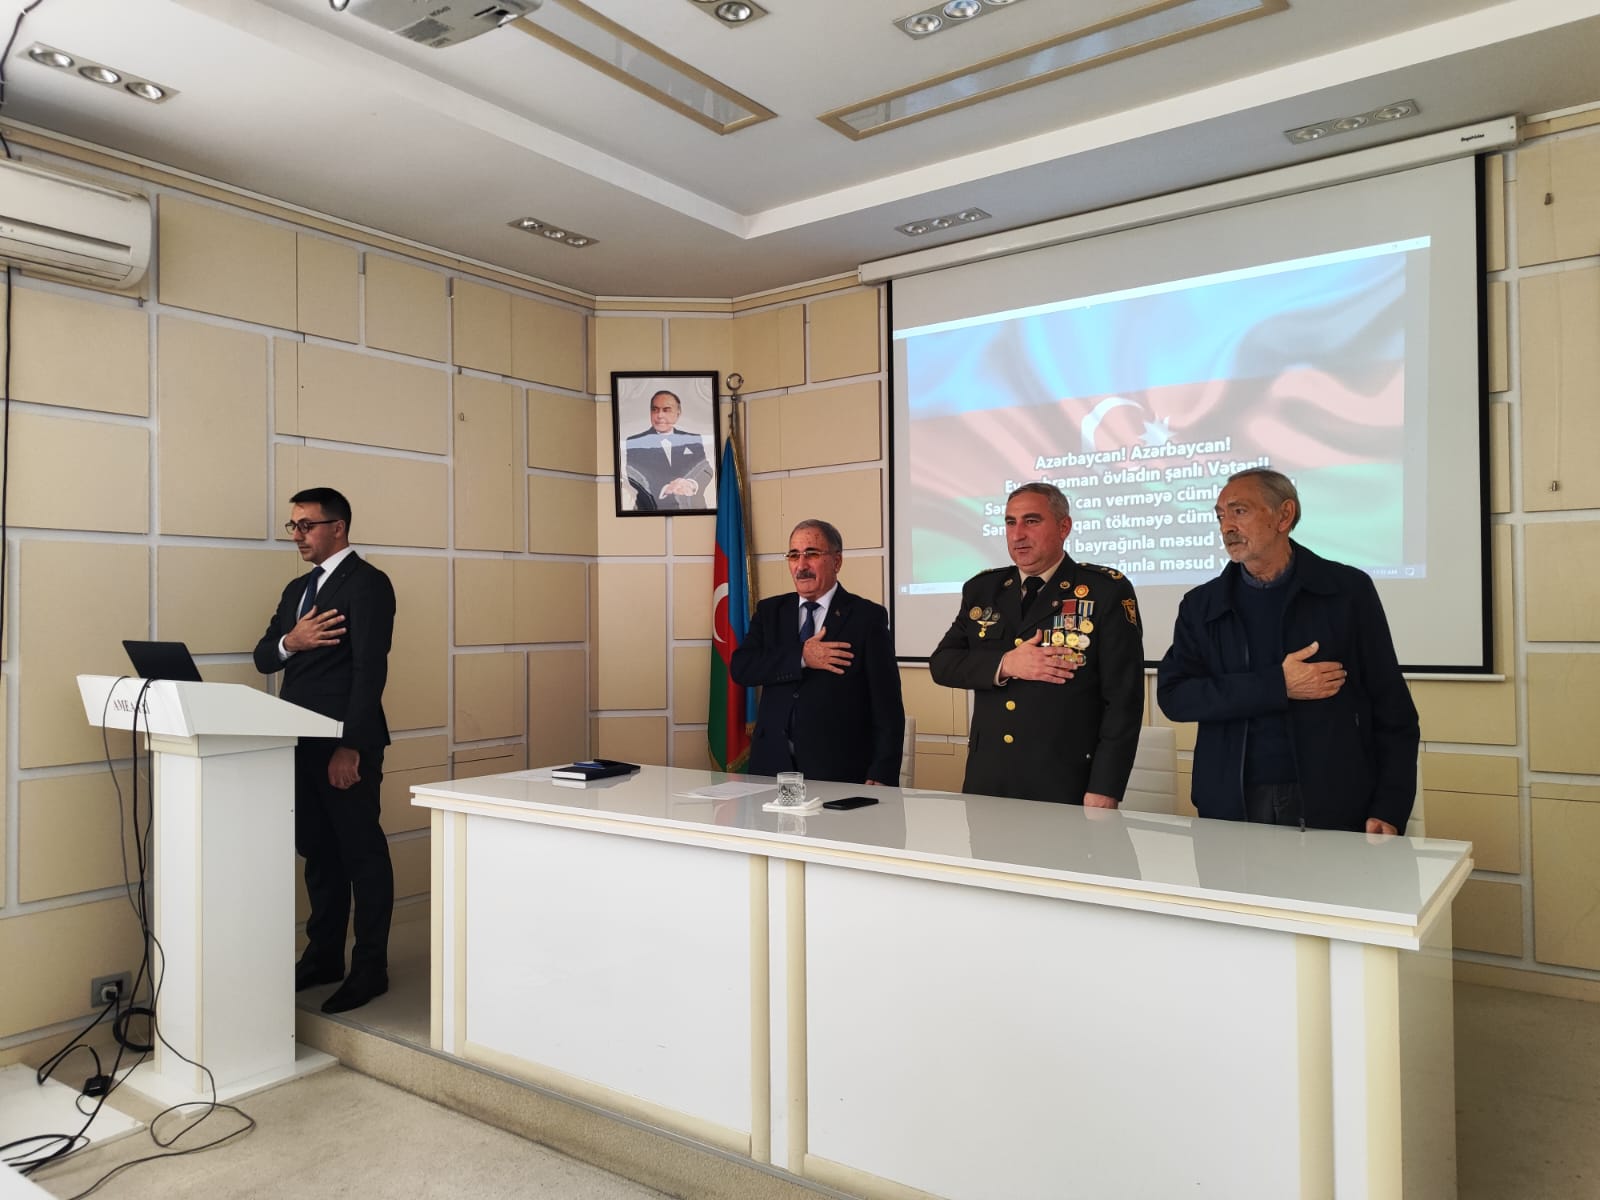 An event was held on the occasion of November 8 Victory Day, in the Institute of Soil Science and Agrochemistry.